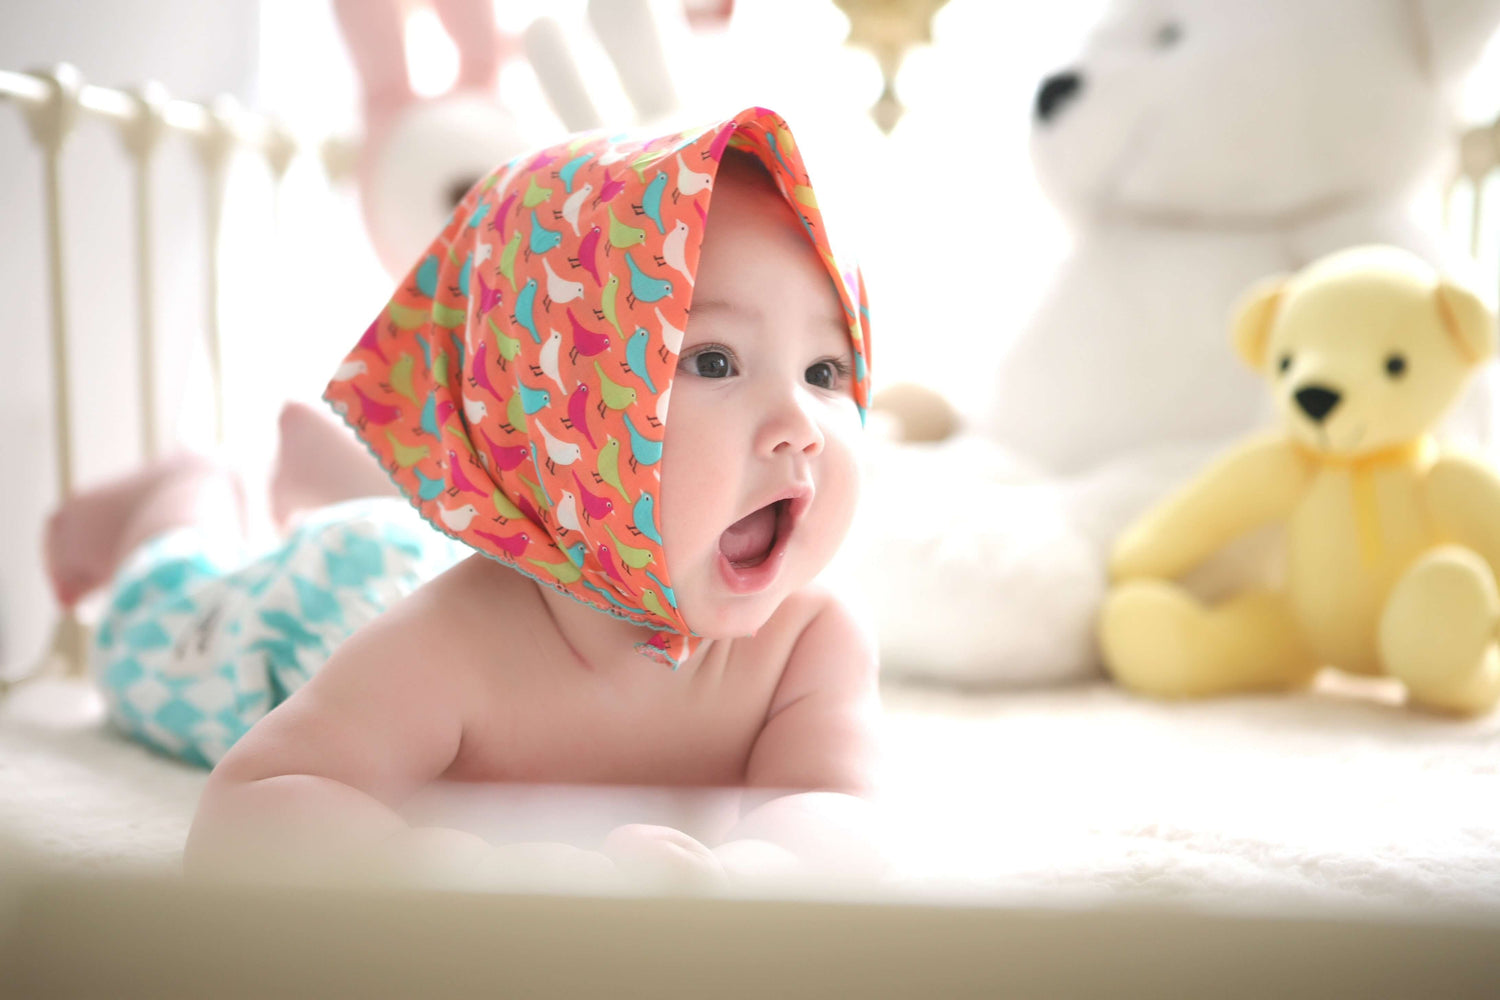 Some features to consider when choosing toys for your 3-month-old babies